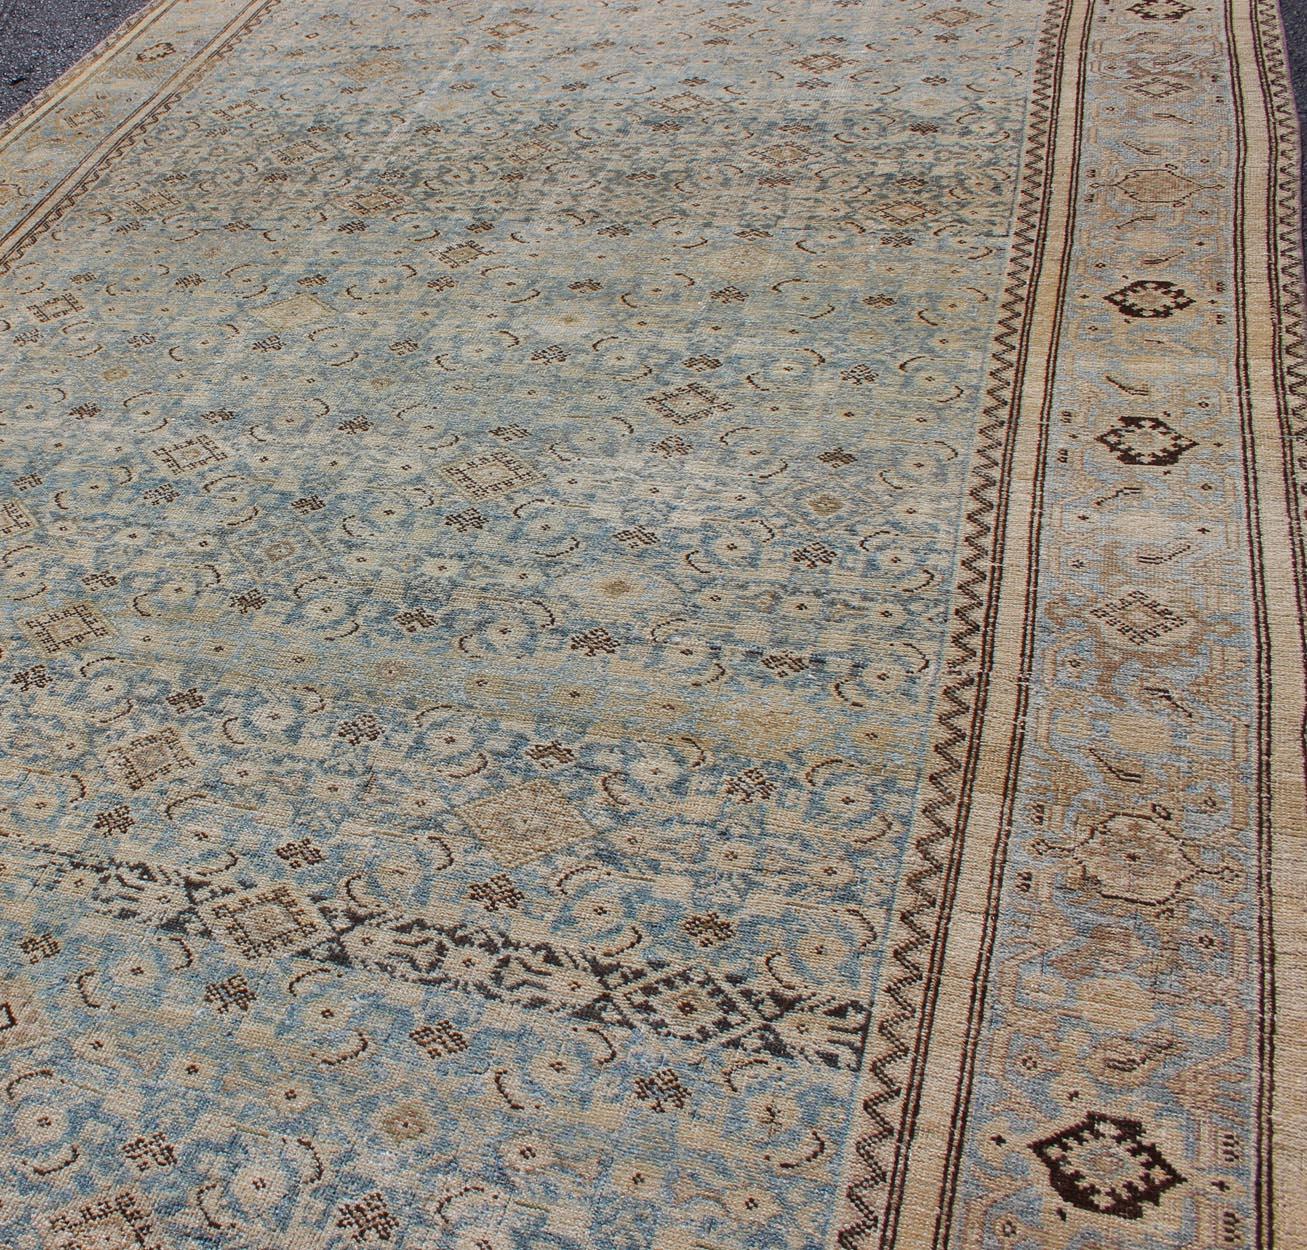 Muted Light Blue Persian Gallery Malayer Rug with Sub-Geometric Design 7